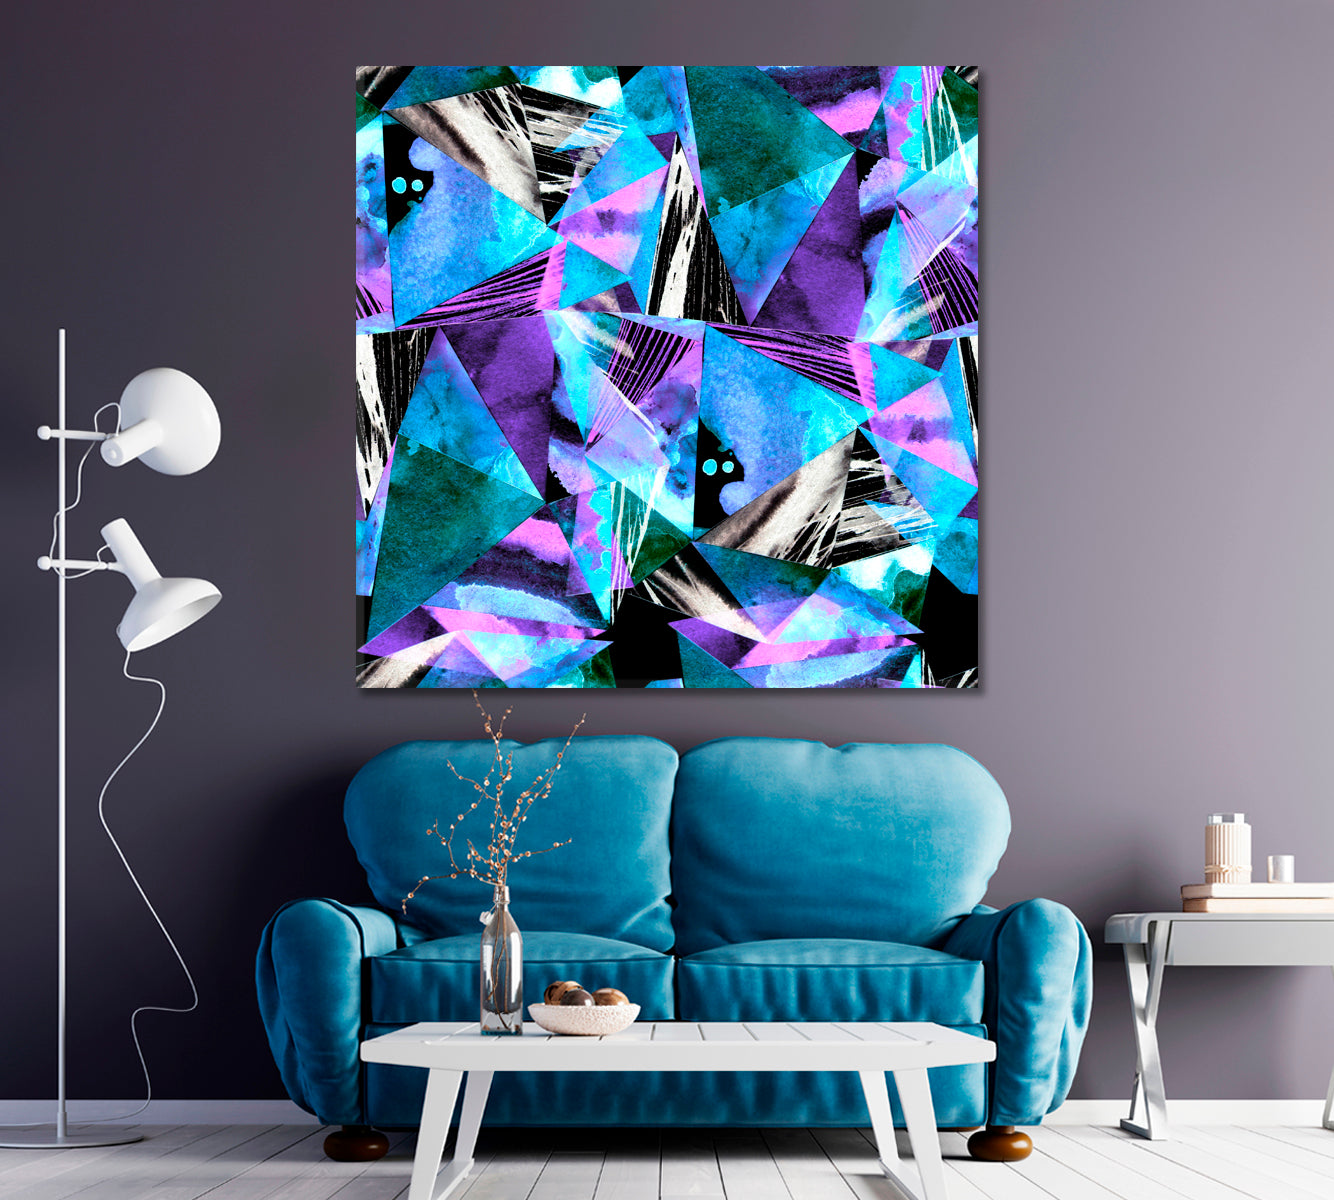 Abstract Colorful Triangles Canvas Print ArtLexy   